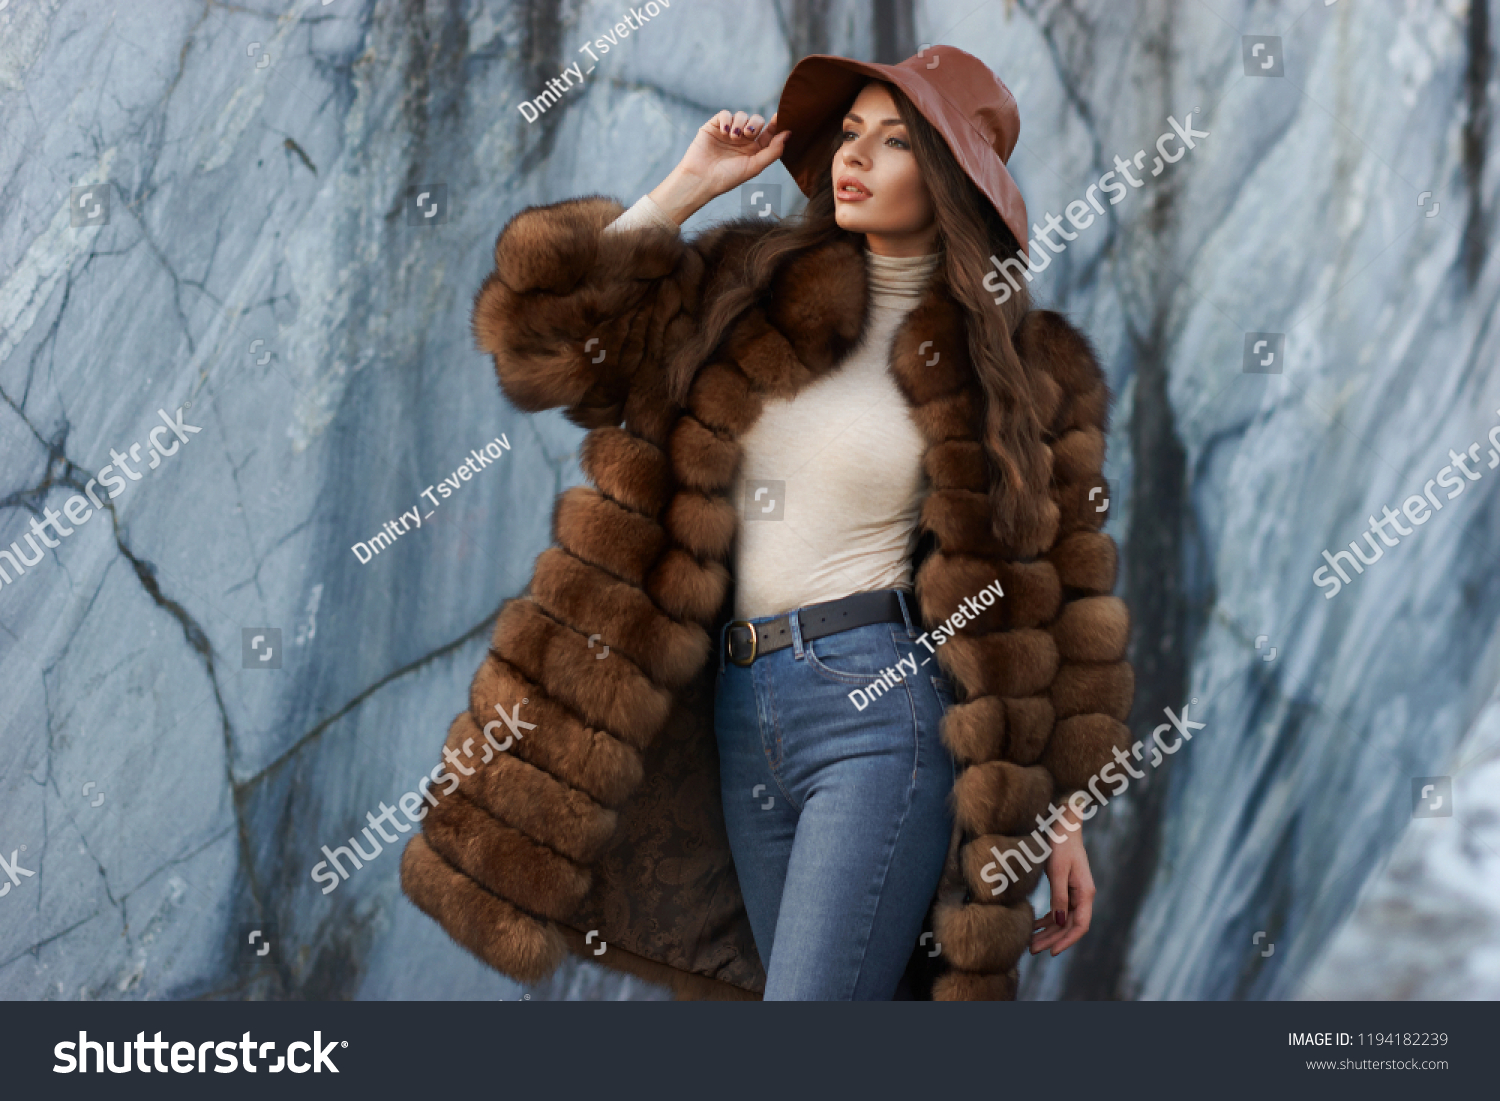 Young gorgeous woman with long wavy brunette hair in brown fur coat standing and posing against gray marble walls at stone quarry. Rich expensive woman #1194182239